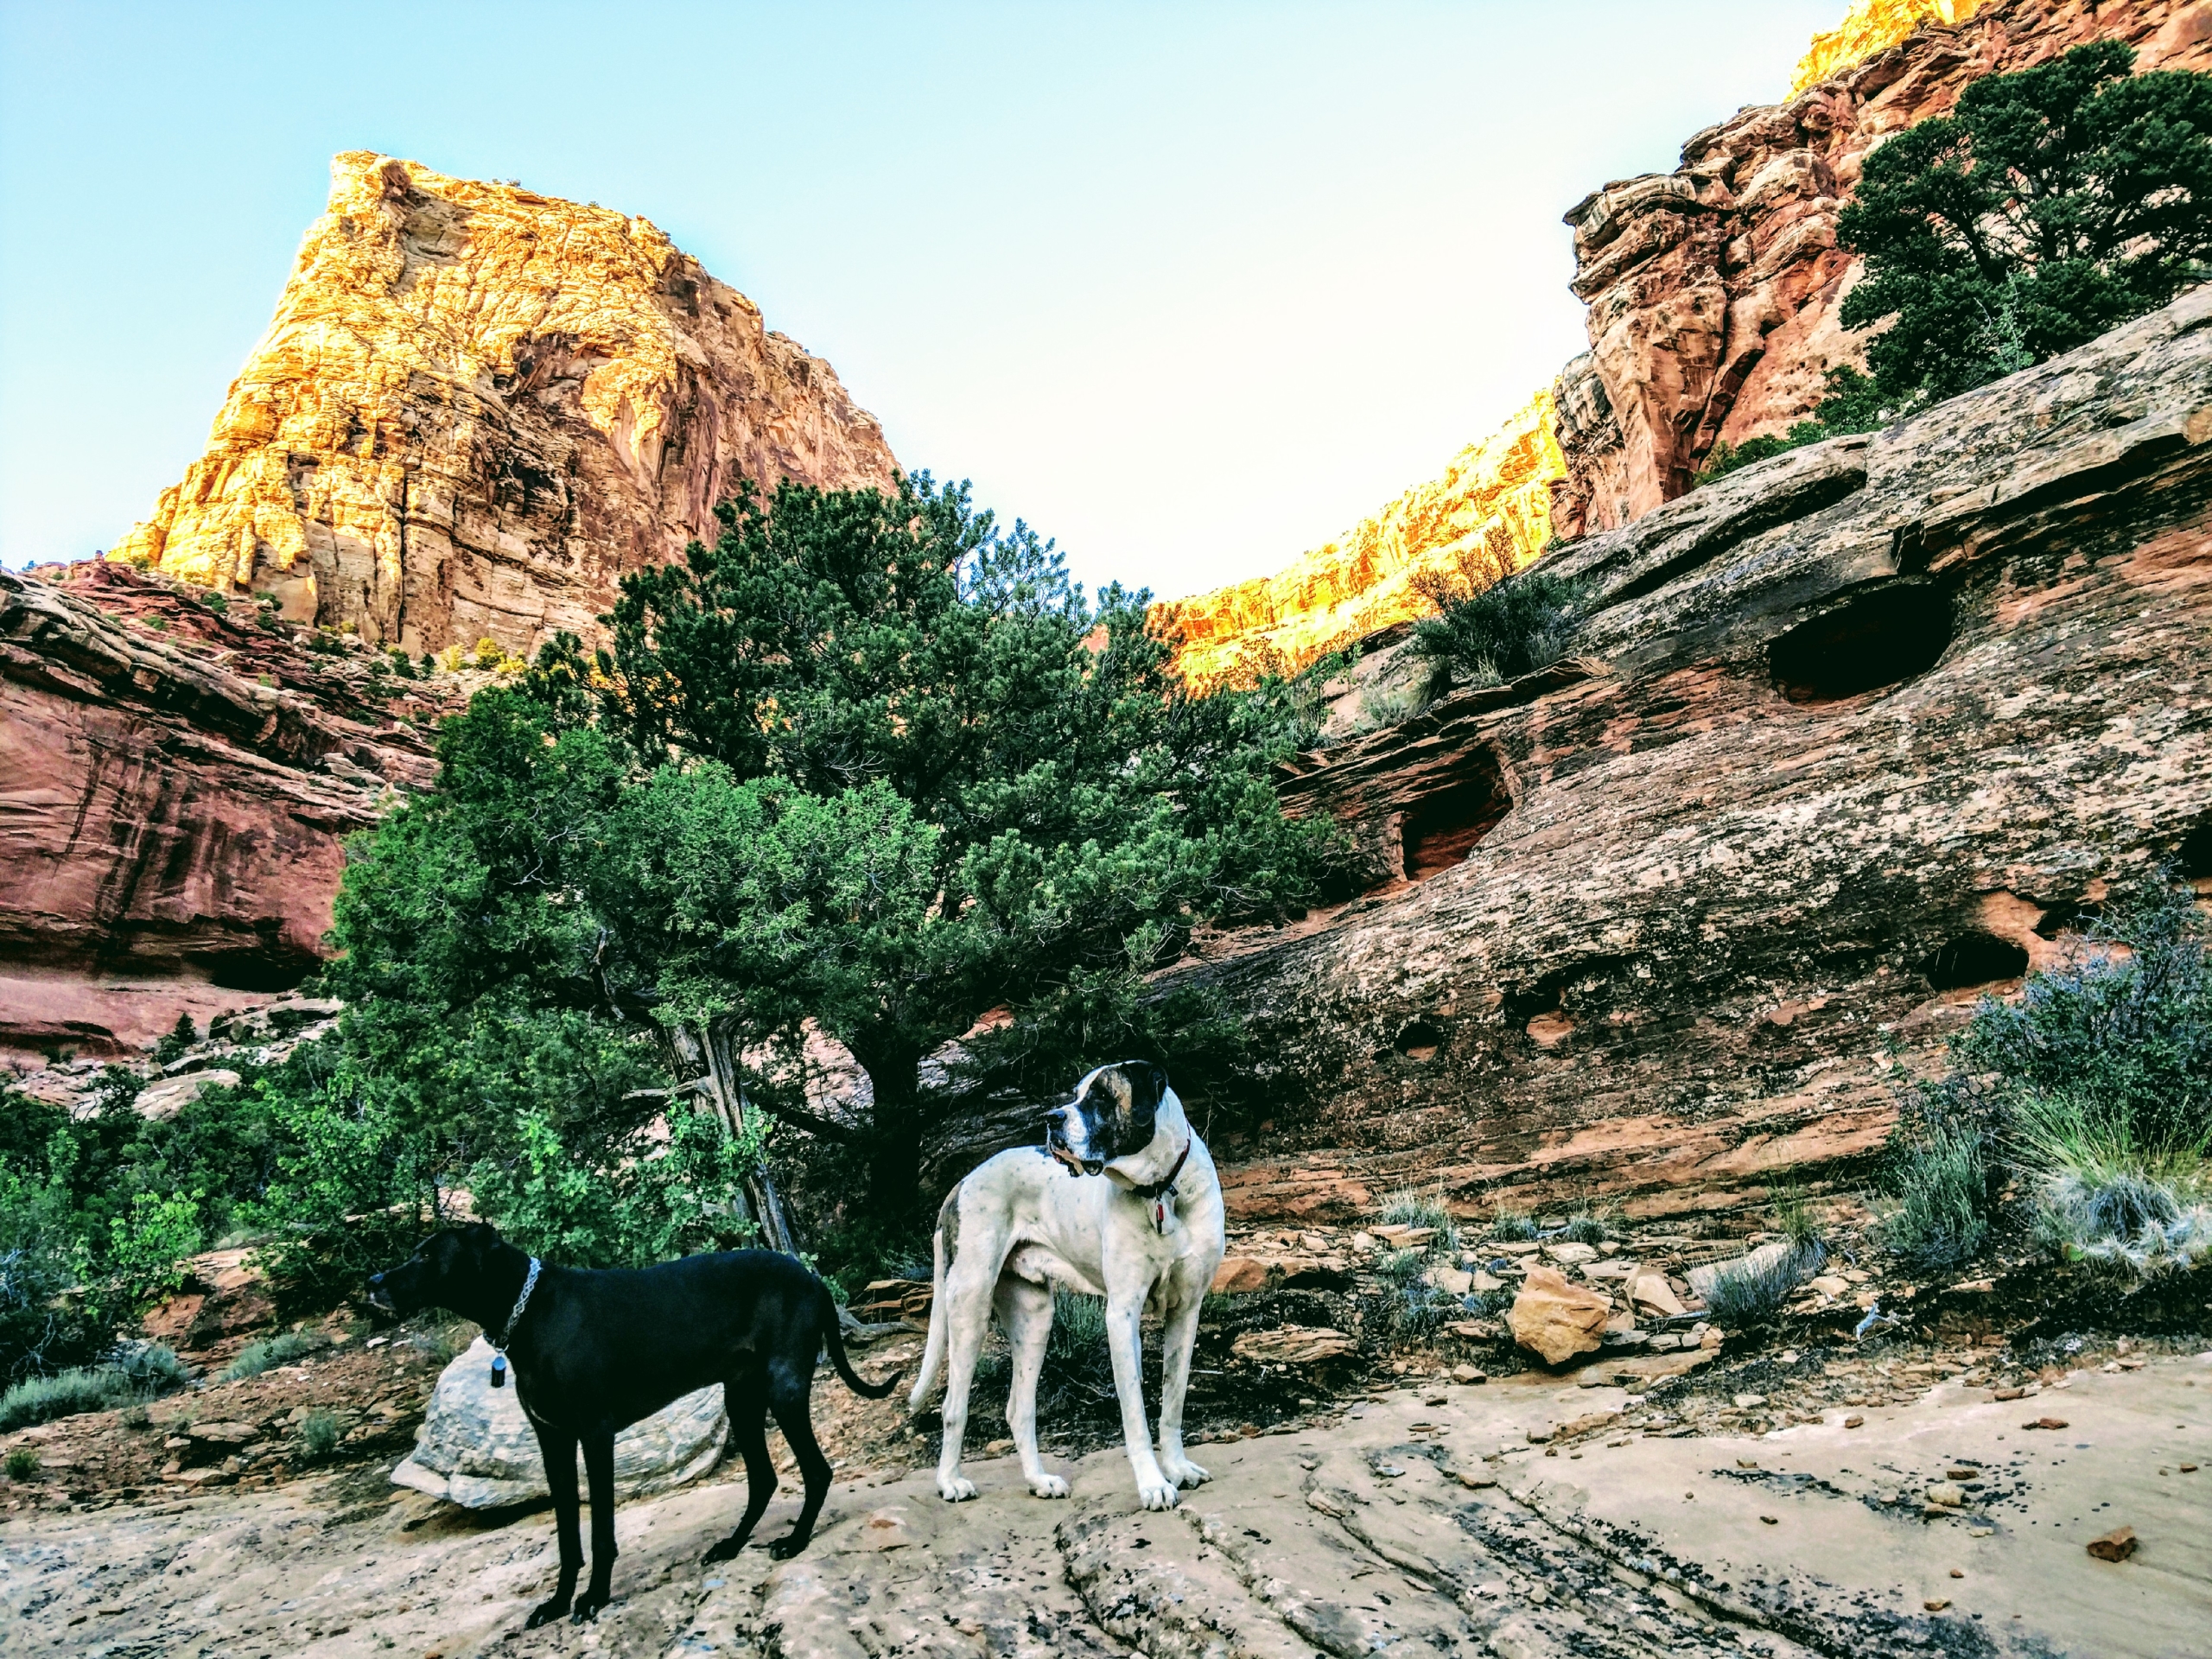 a white and brown dog stands next to a black dog. They stand next to a small tree in a brown rocky canyon.